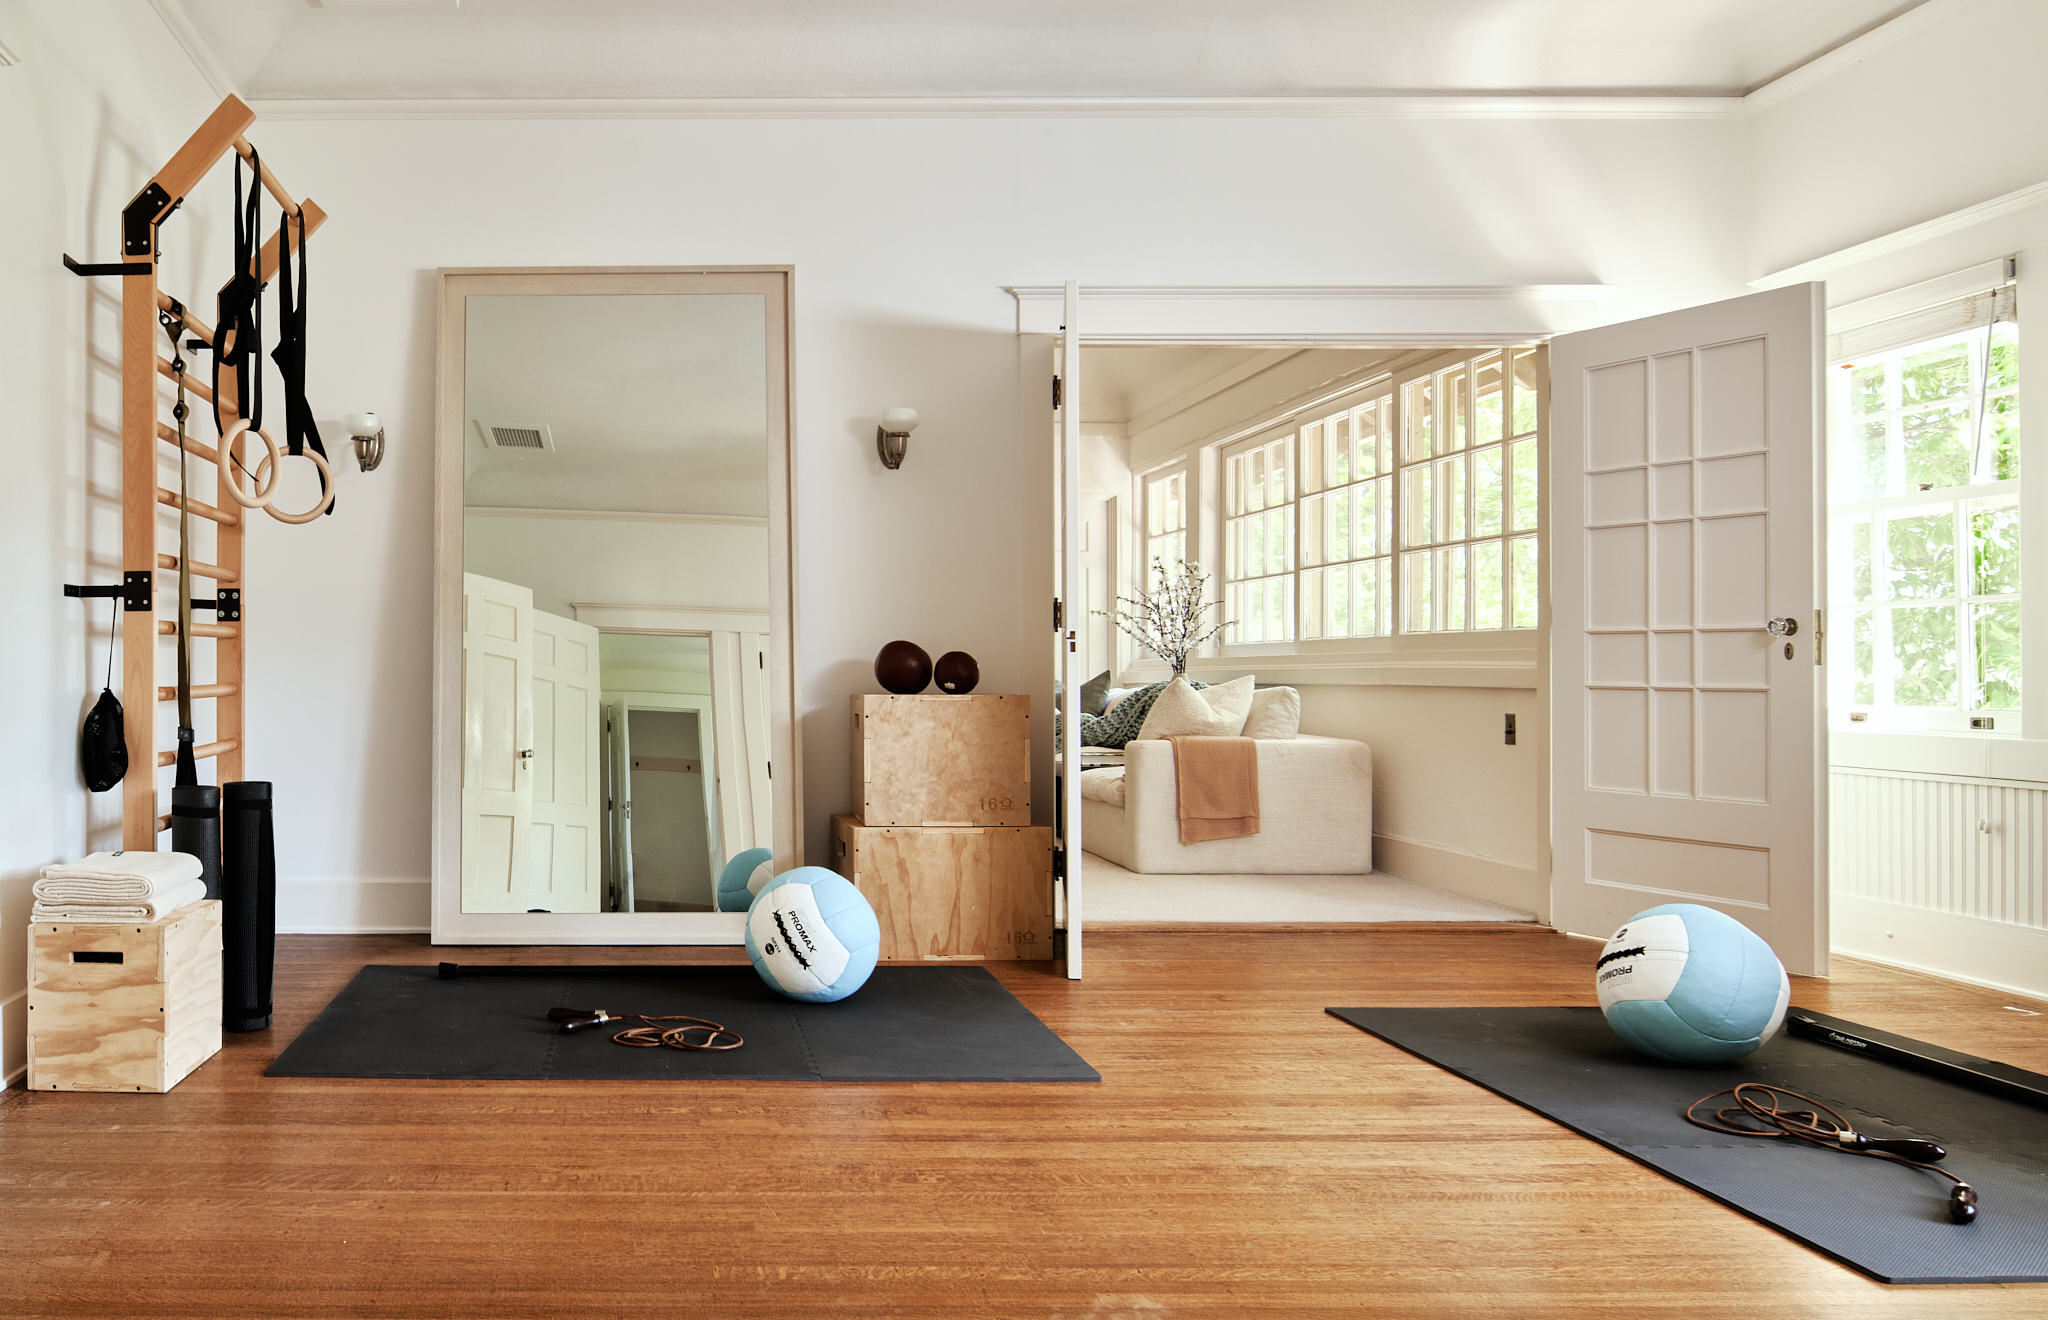 A workingout room with a medicine ball, yoga mate, and mirror. 